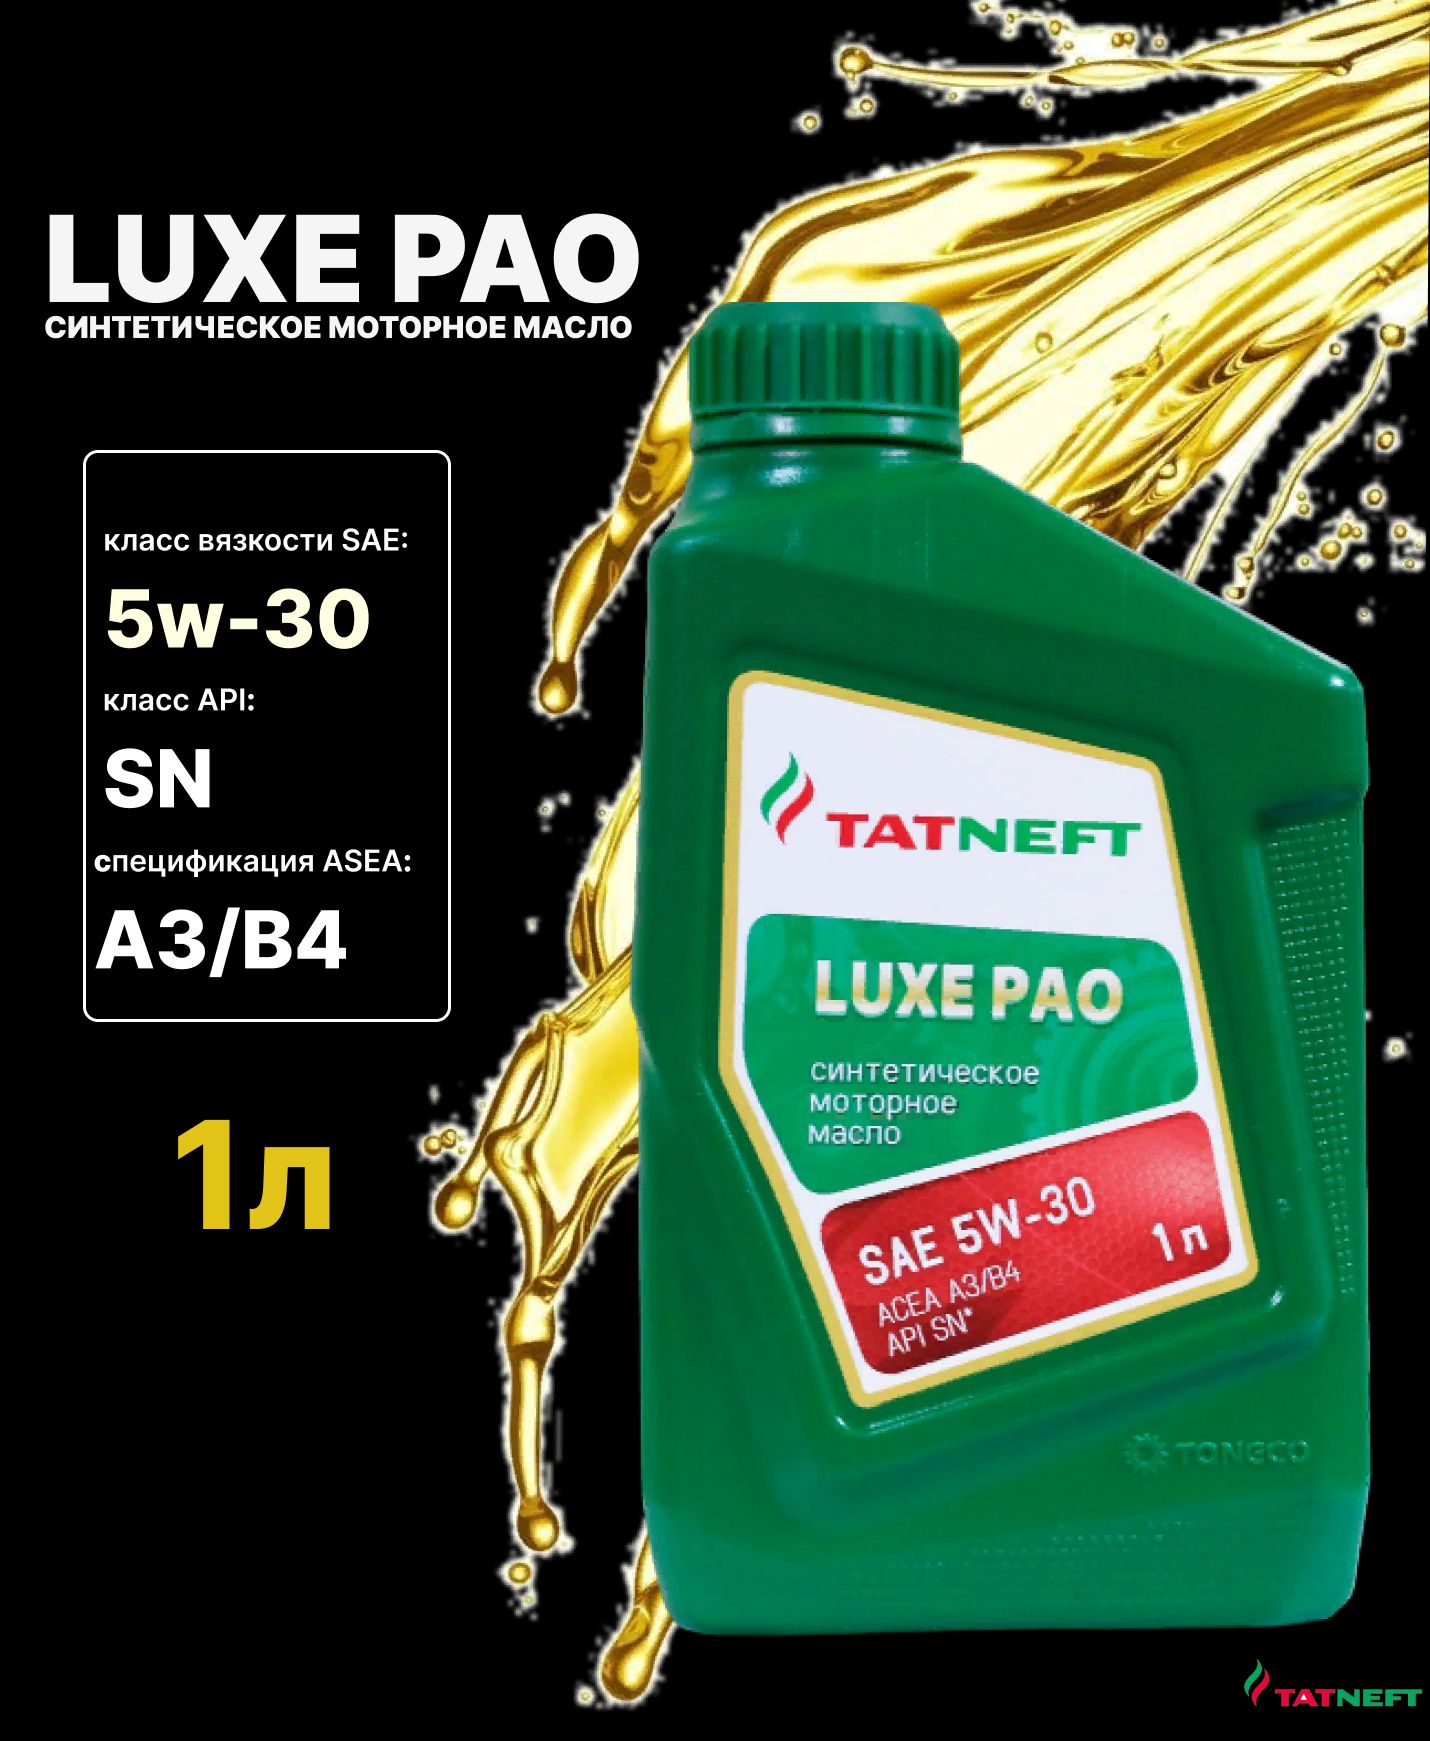 TATNEFT Luxe Pao 5w30. Моторное масло TATNEFT Luxe Pao 5w-30 синтетическое. 5w30 Pao TATNEFT. TATNEFT Luxe Pao 5w-30 в дизельный Мерседес. Моторное масло татнефть 5w 30